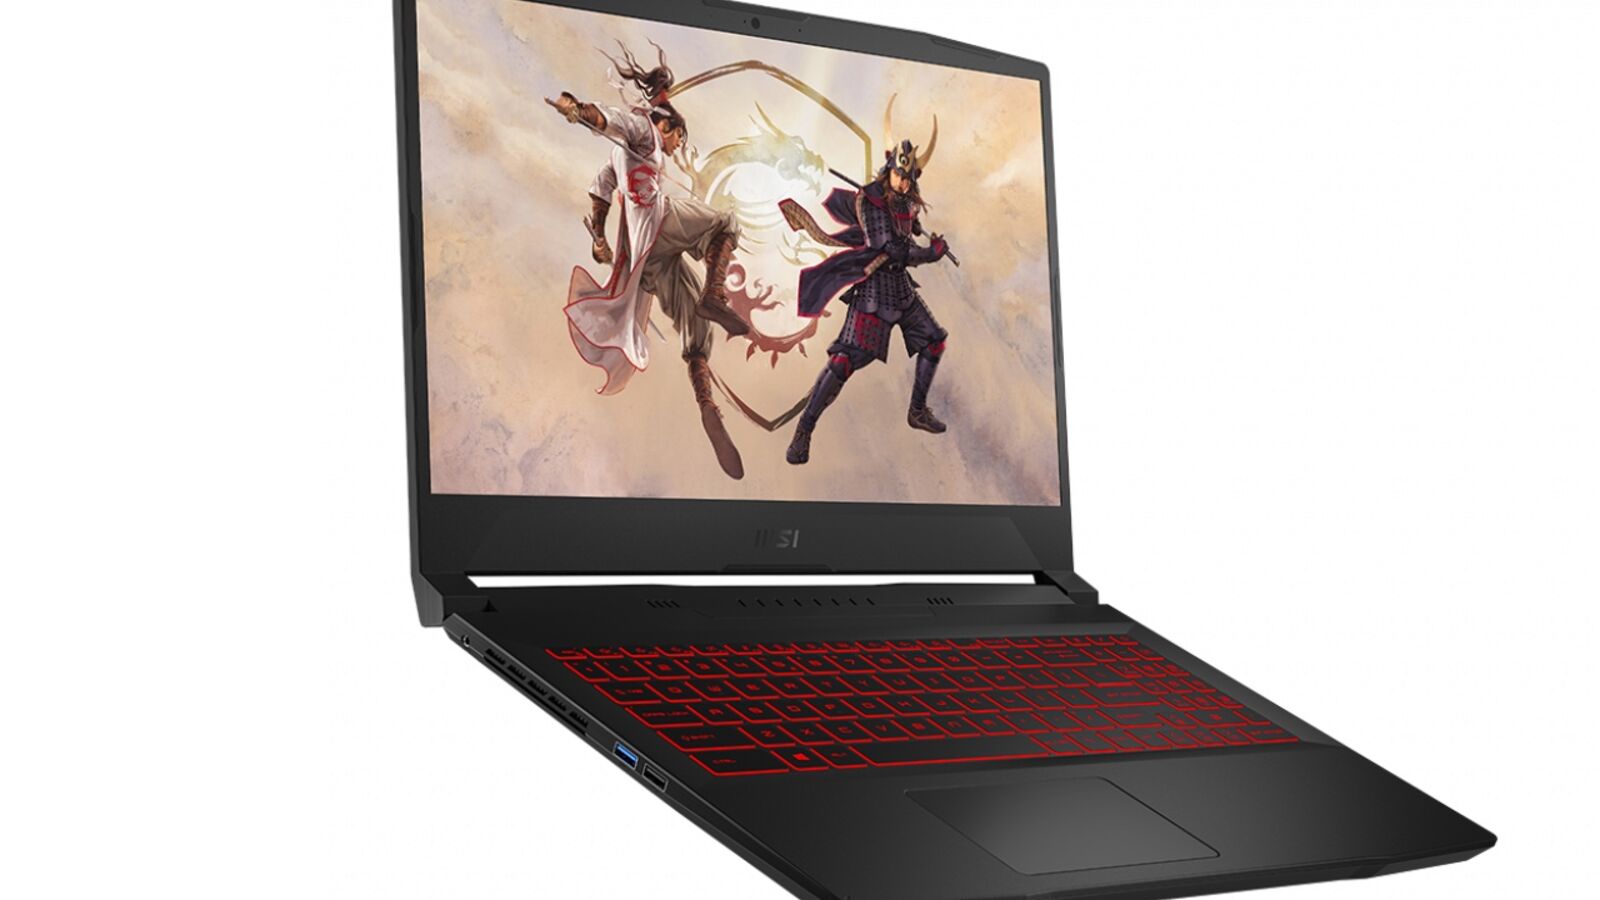 Save £400 on this MSI Katana gaming laptop with an RTX 3070